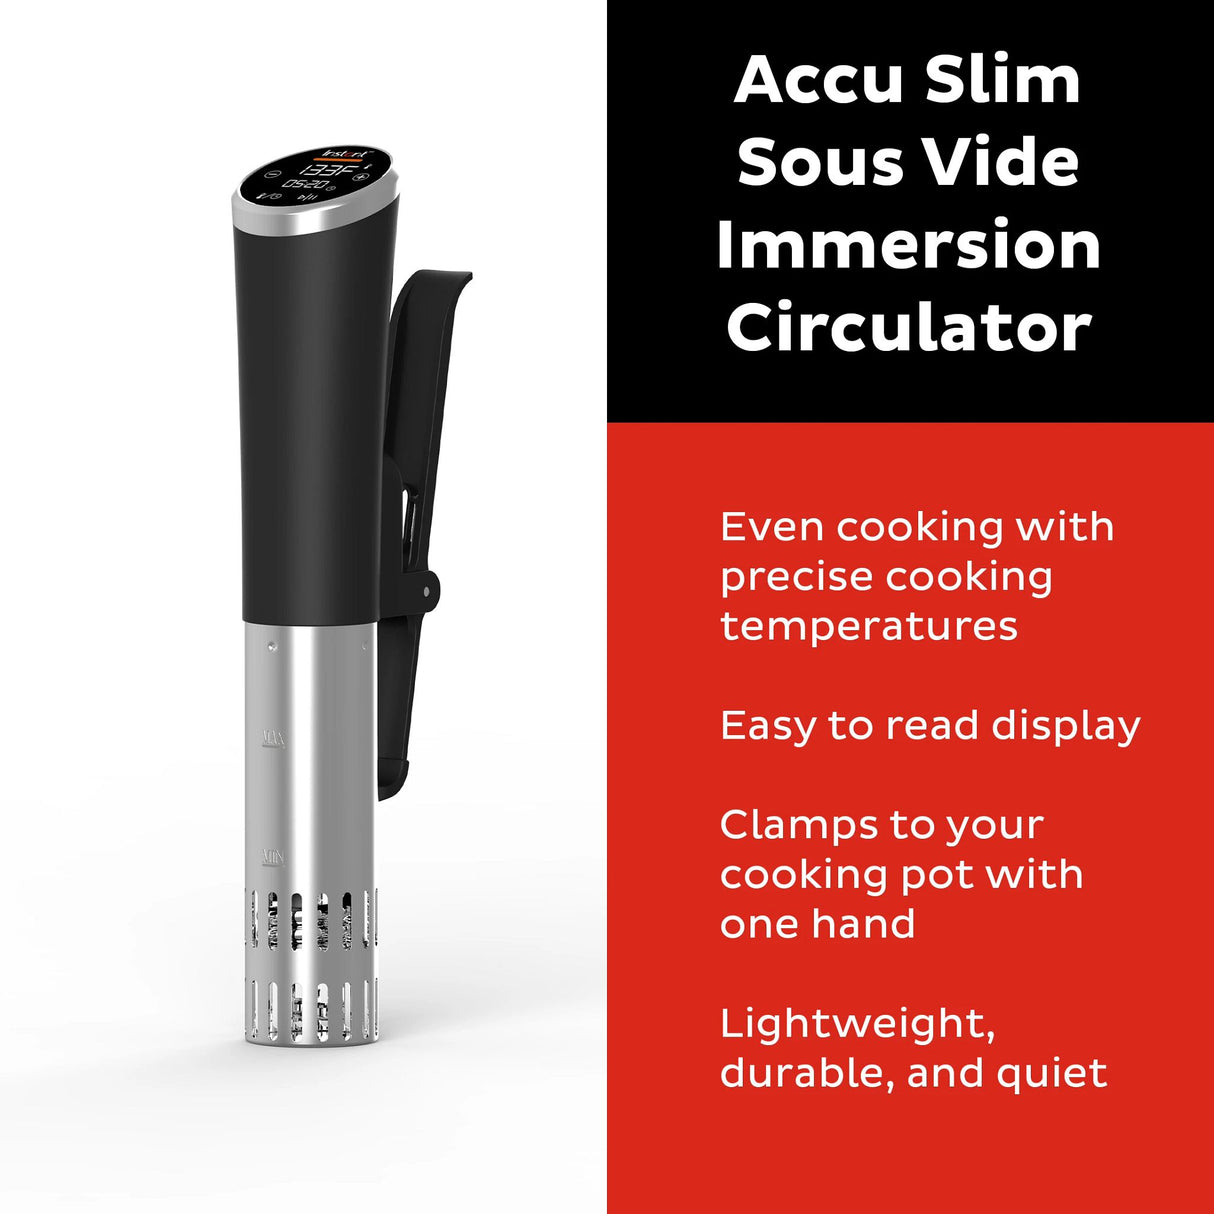  Accu Slim™ Sous Vide Immersion Circulator-text: even cooking with precise cooking temperatures